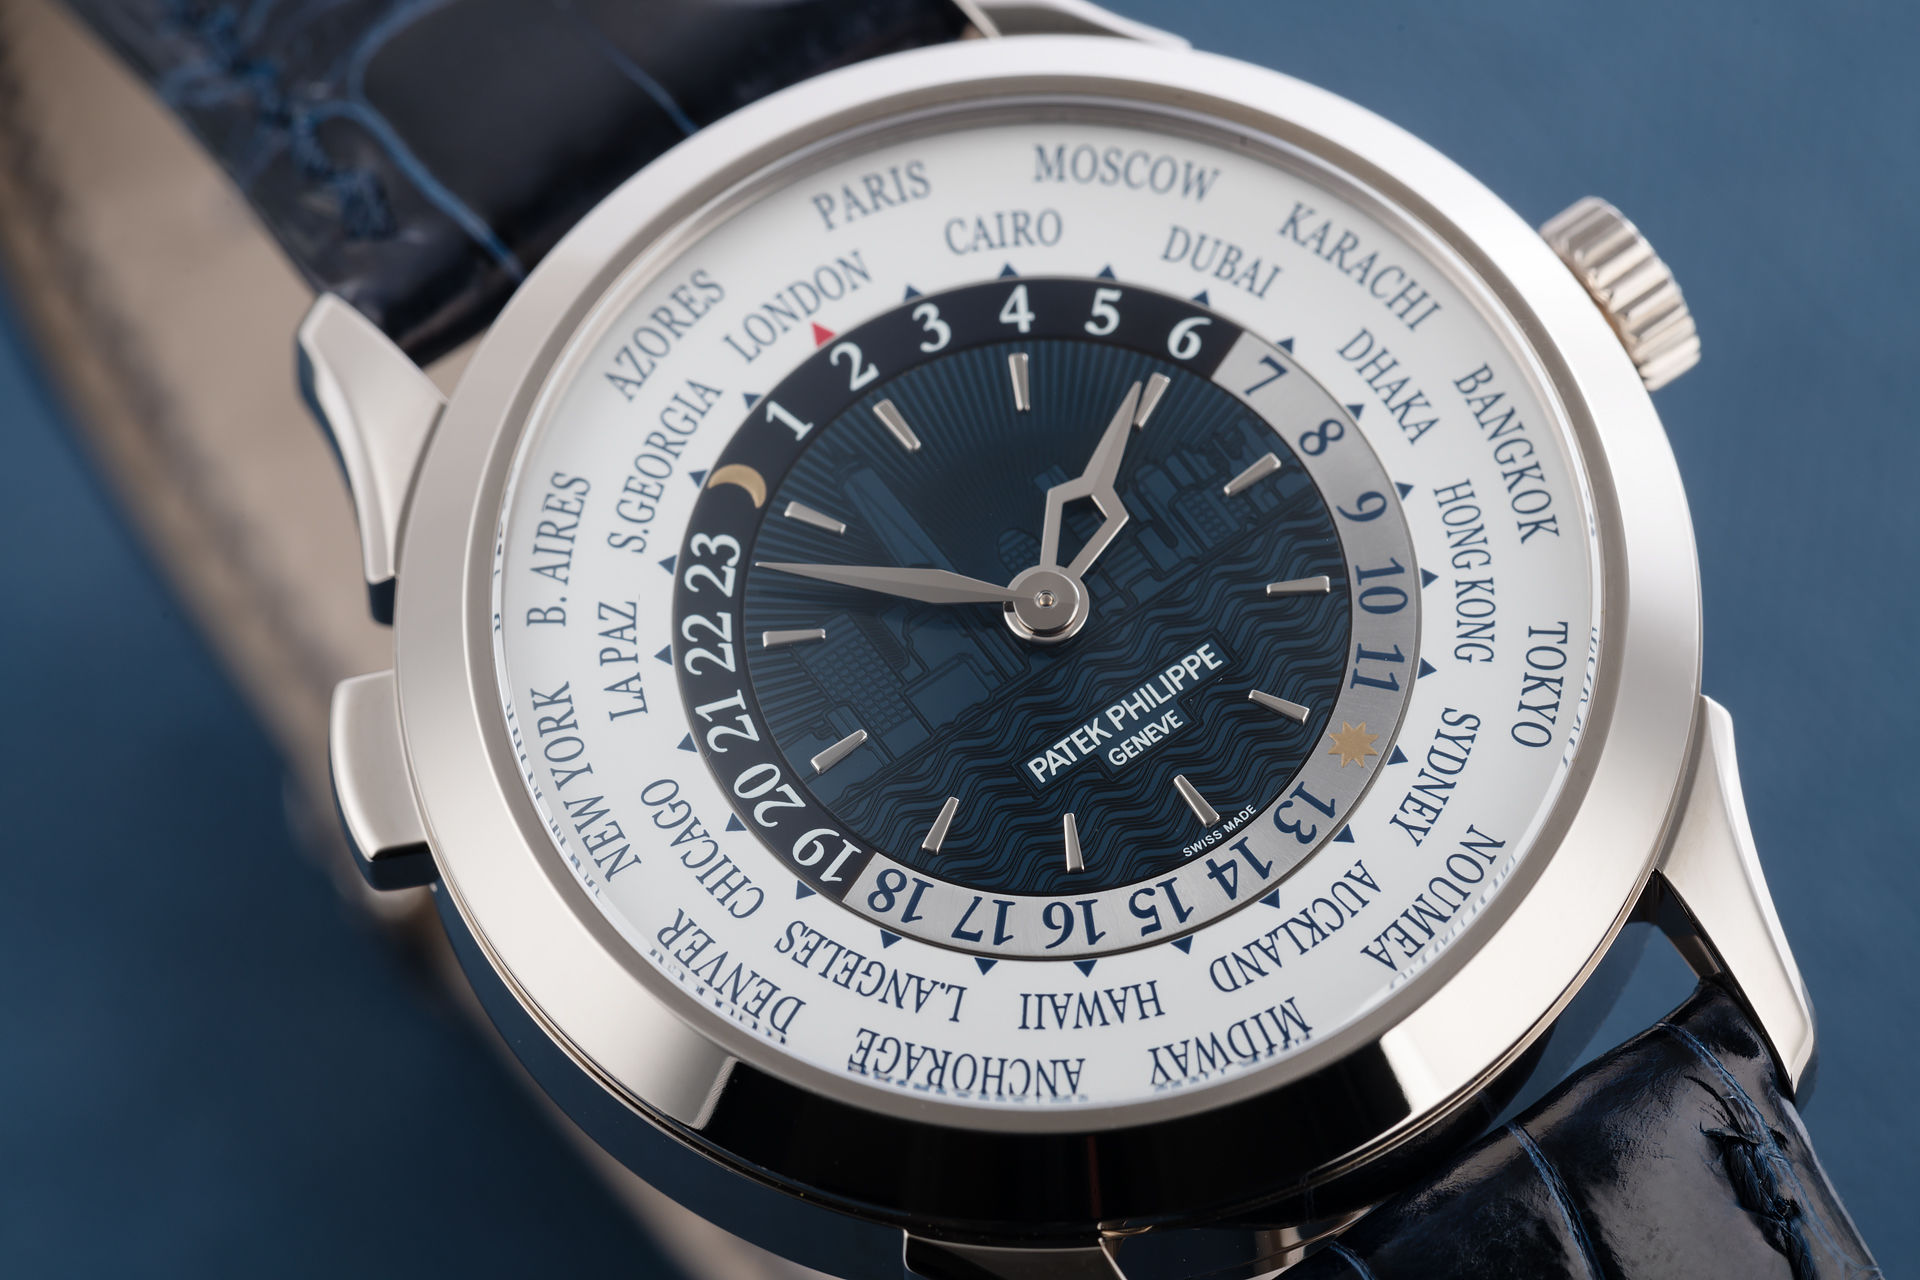 ref 5230G-010 | Limited to 300 Pieces 'Full Set' | Patek Philippe World Time